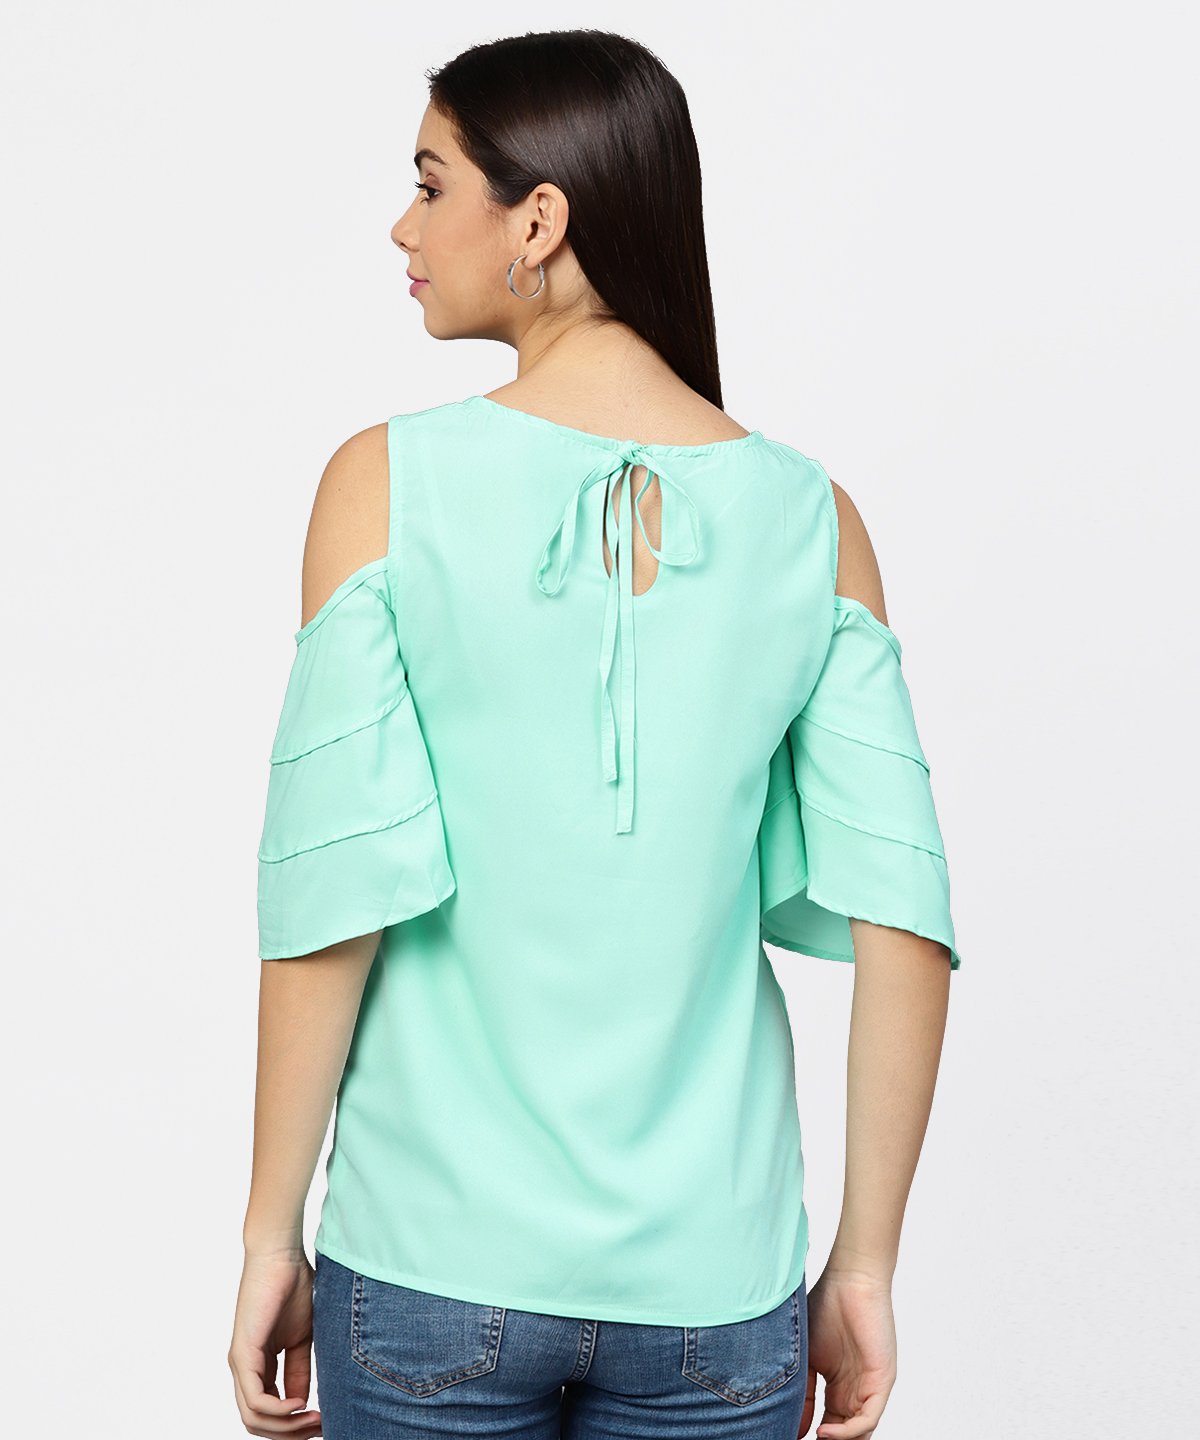 Women's Sea Green Cold Shoulder Layered Sleeve Crepe Top - Nayo Clothing